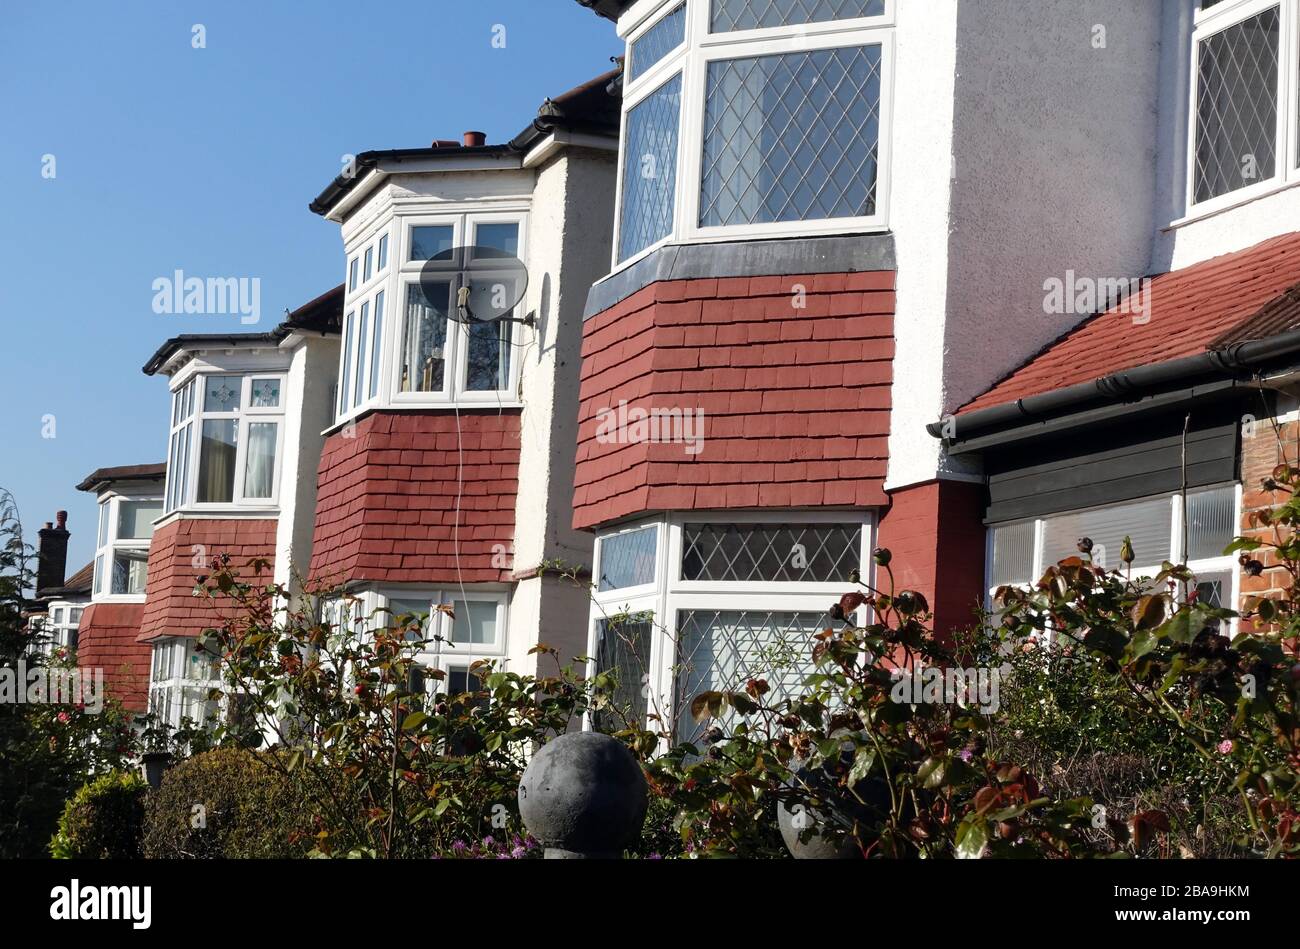 Semi-detached houses in South London Stock Photo